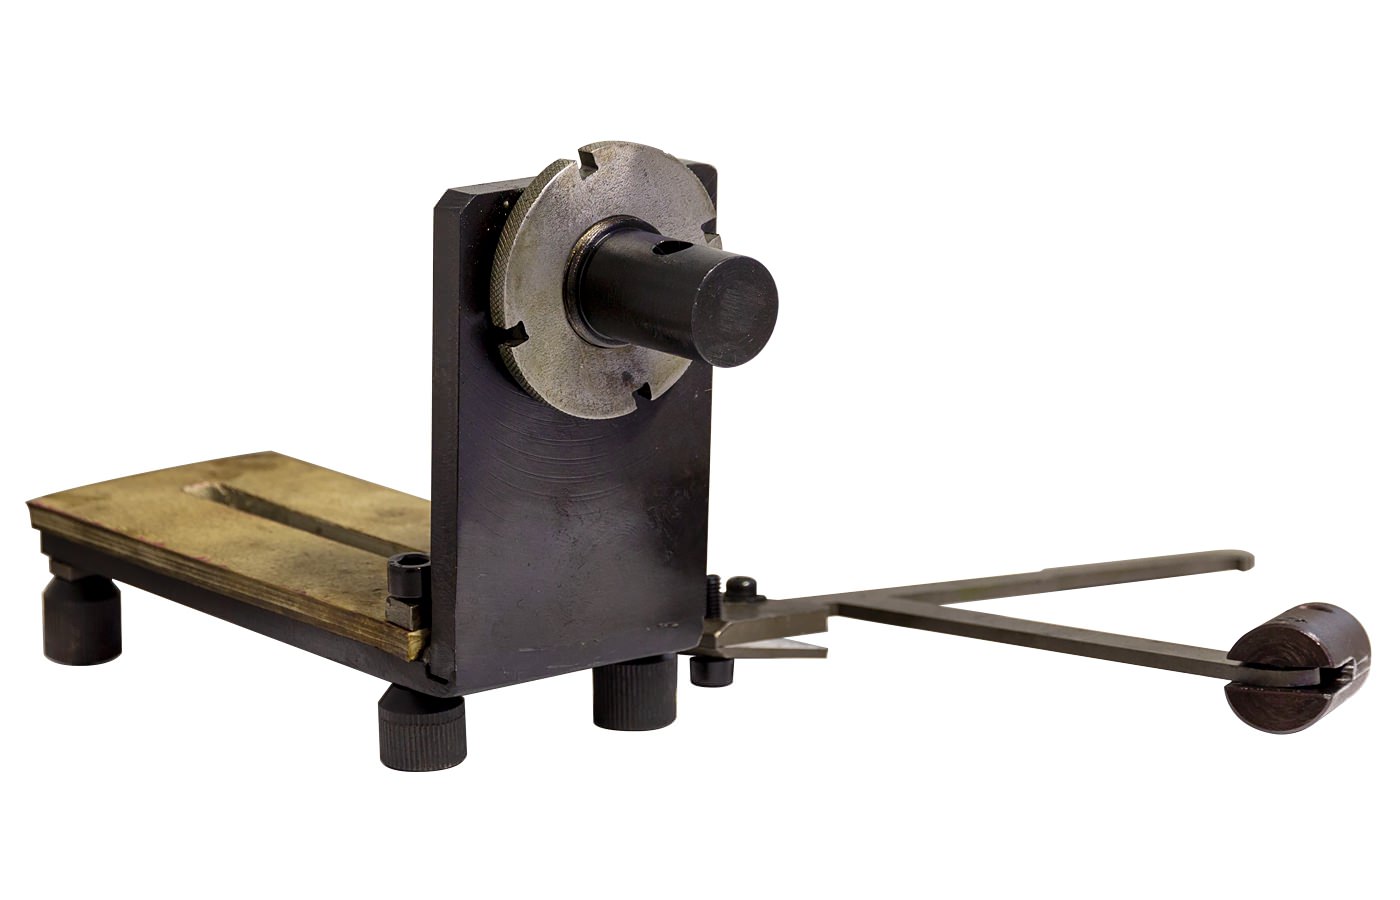 Cut resistance tester (up to 3 kN)